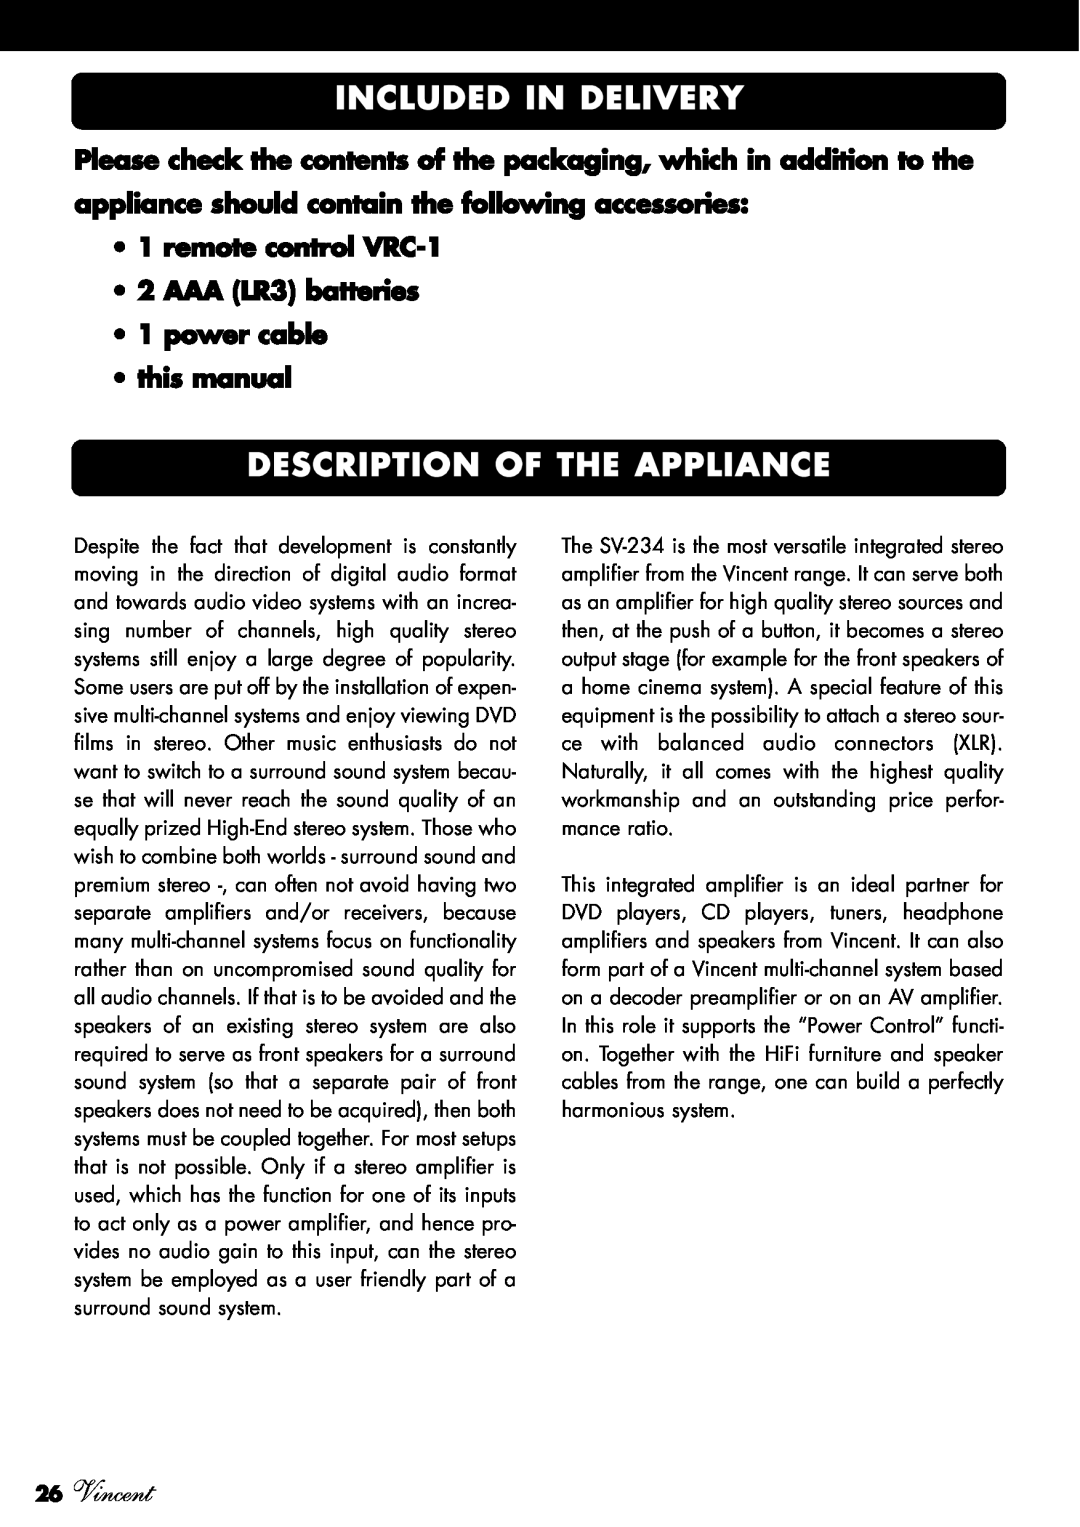 Vincent Audio SV-234 Included In Delivery, Description Of The Appliance, 26Vincent, power cable this manual 